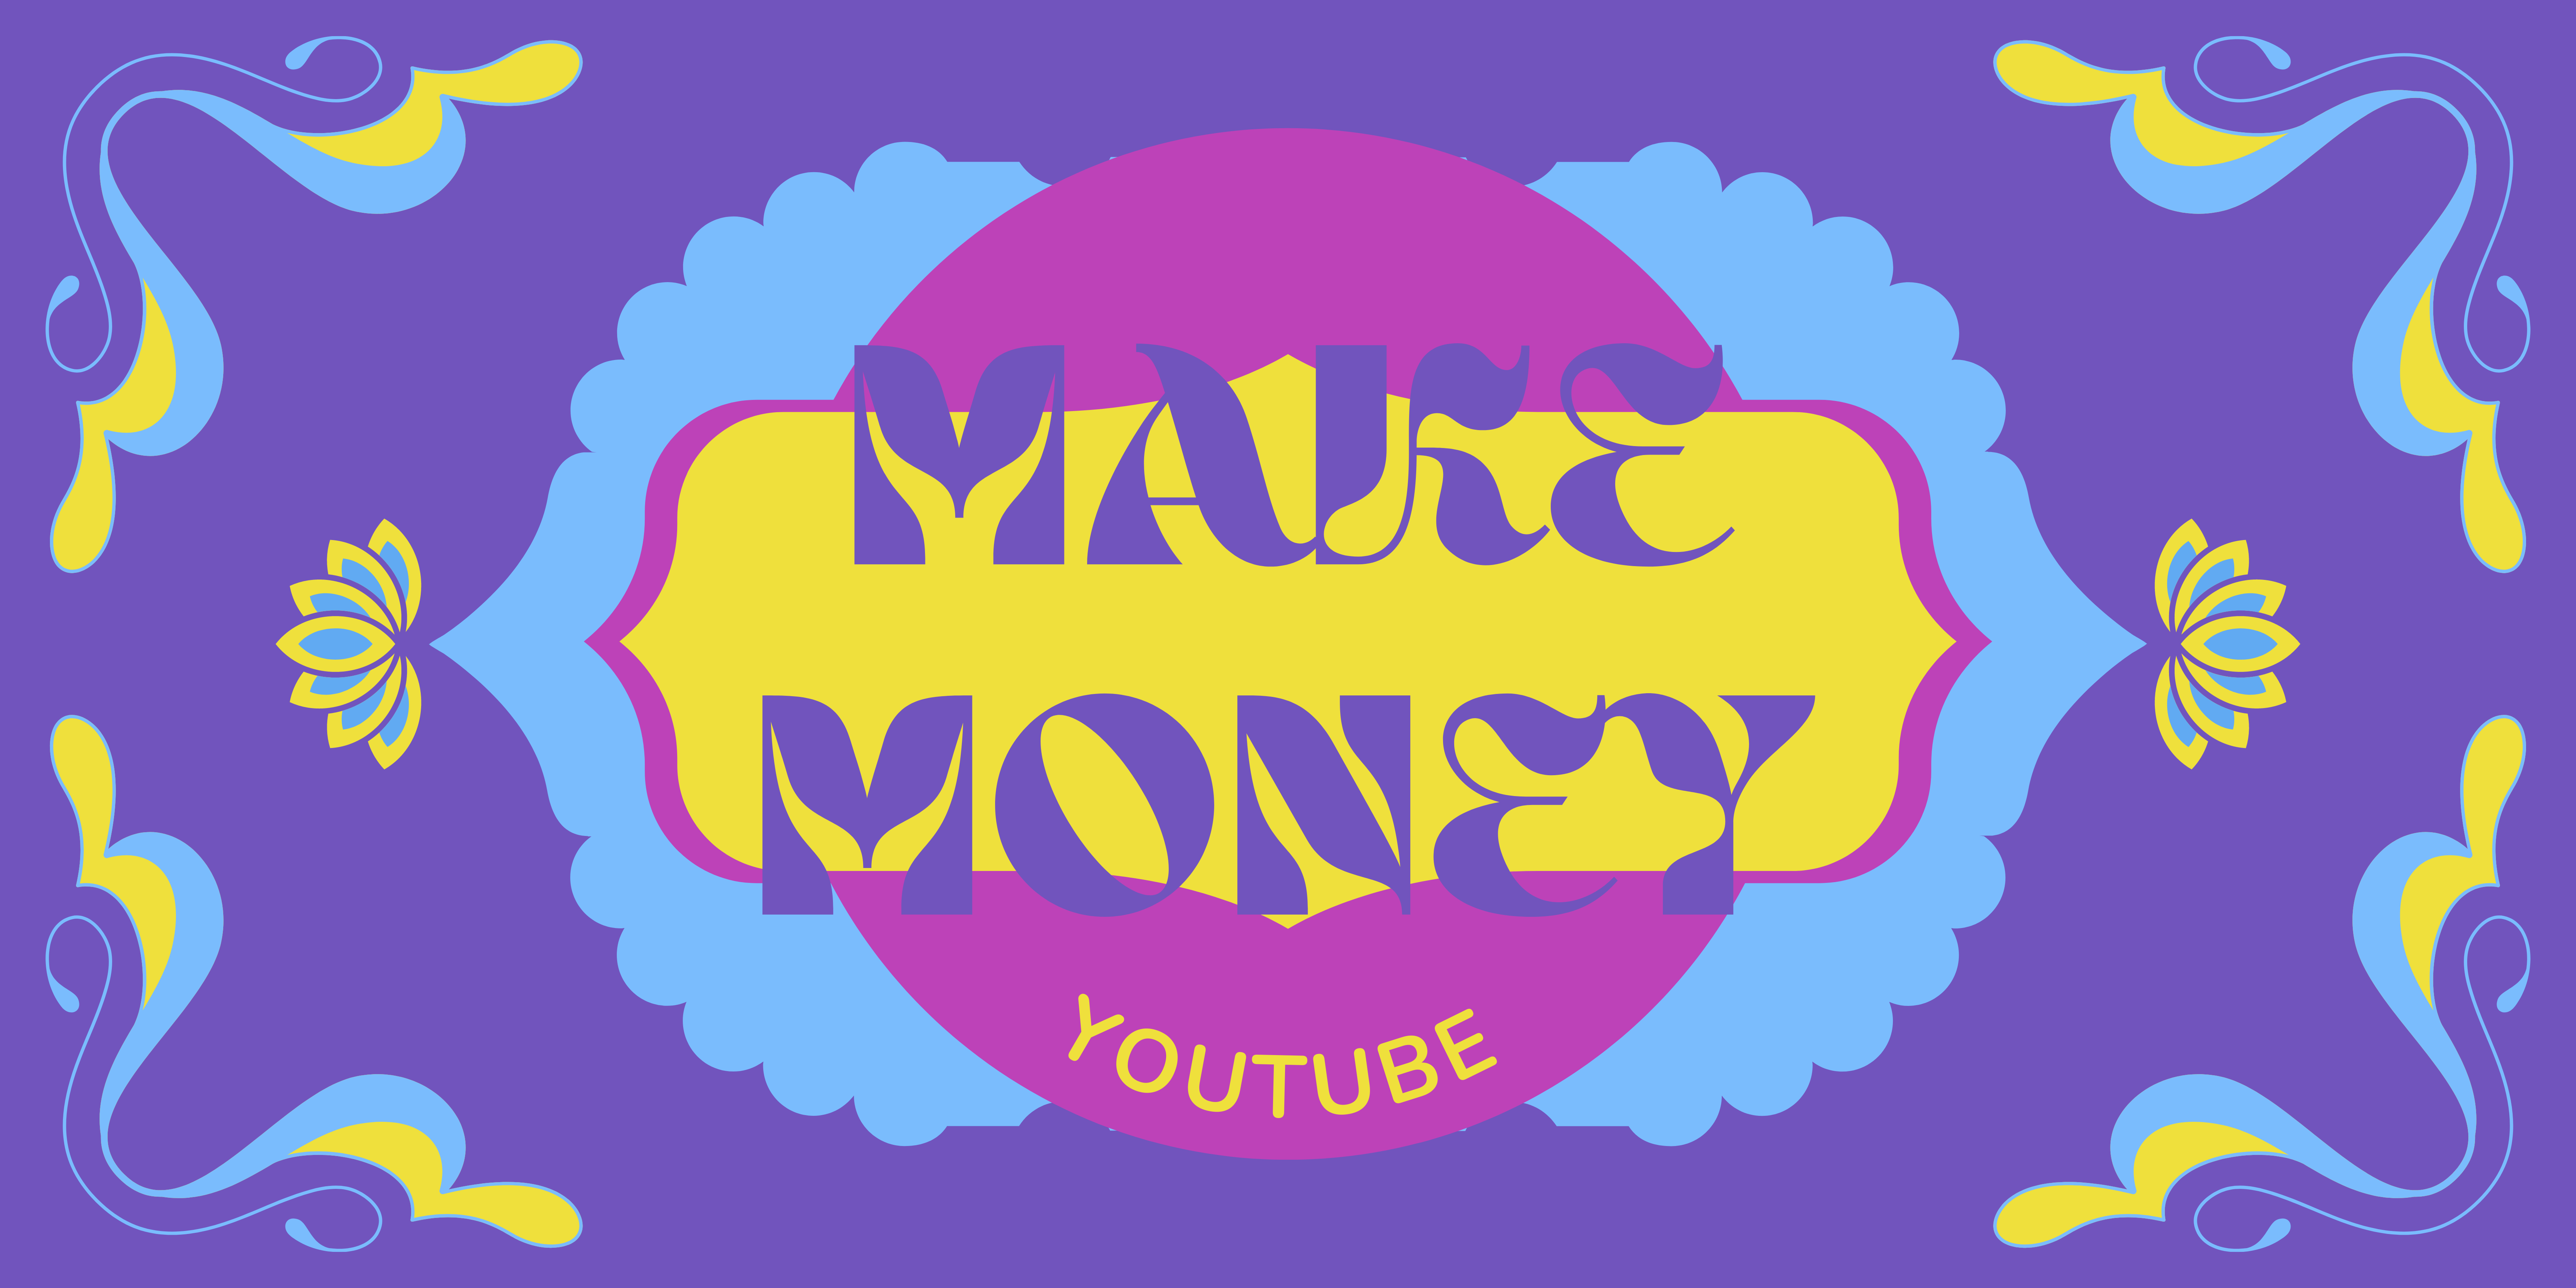 How to Make Money from your YouTube Channel?